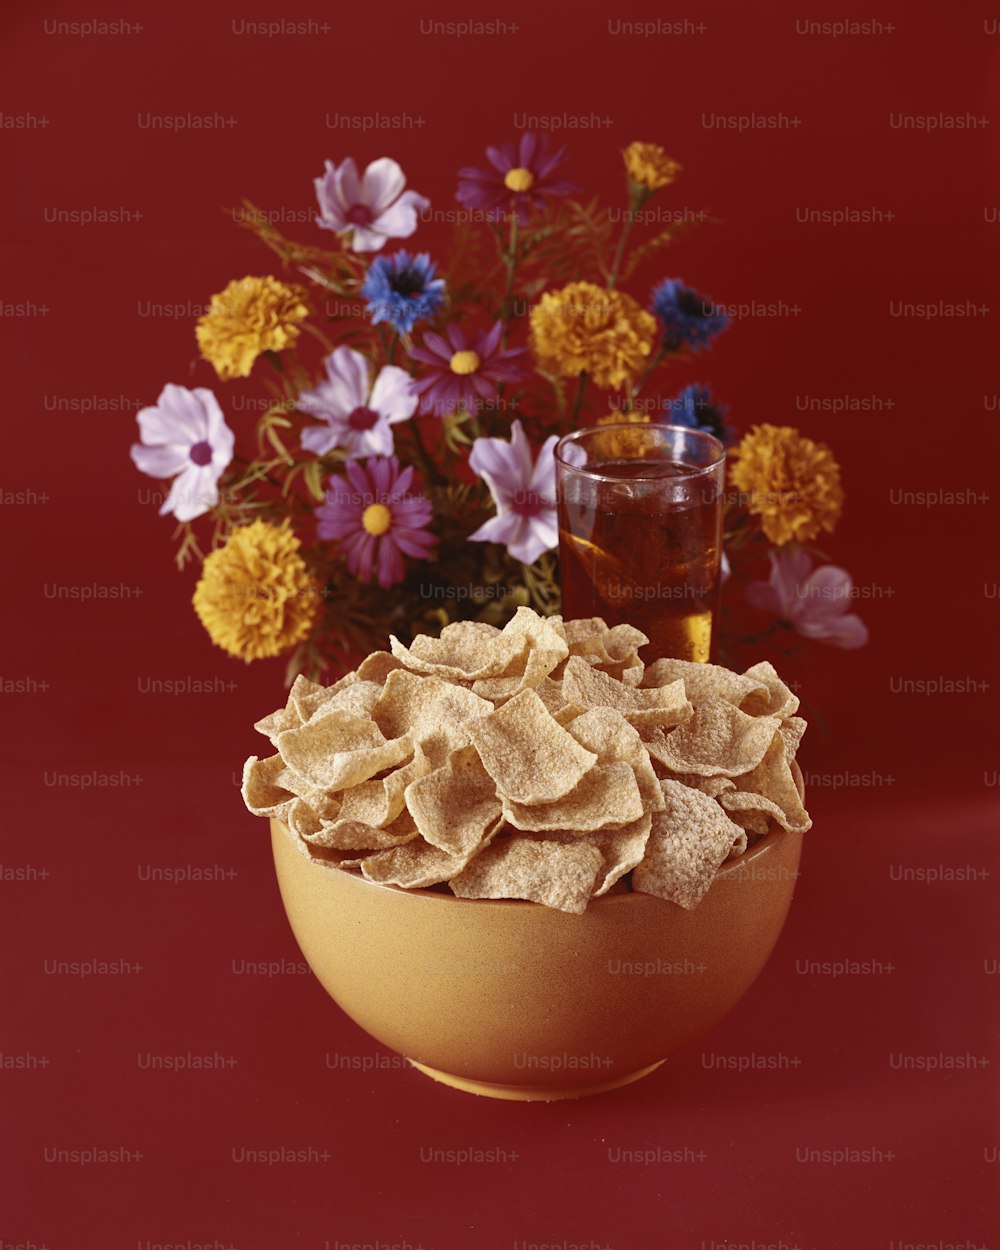 a bowl of chips next to a vase of flowers